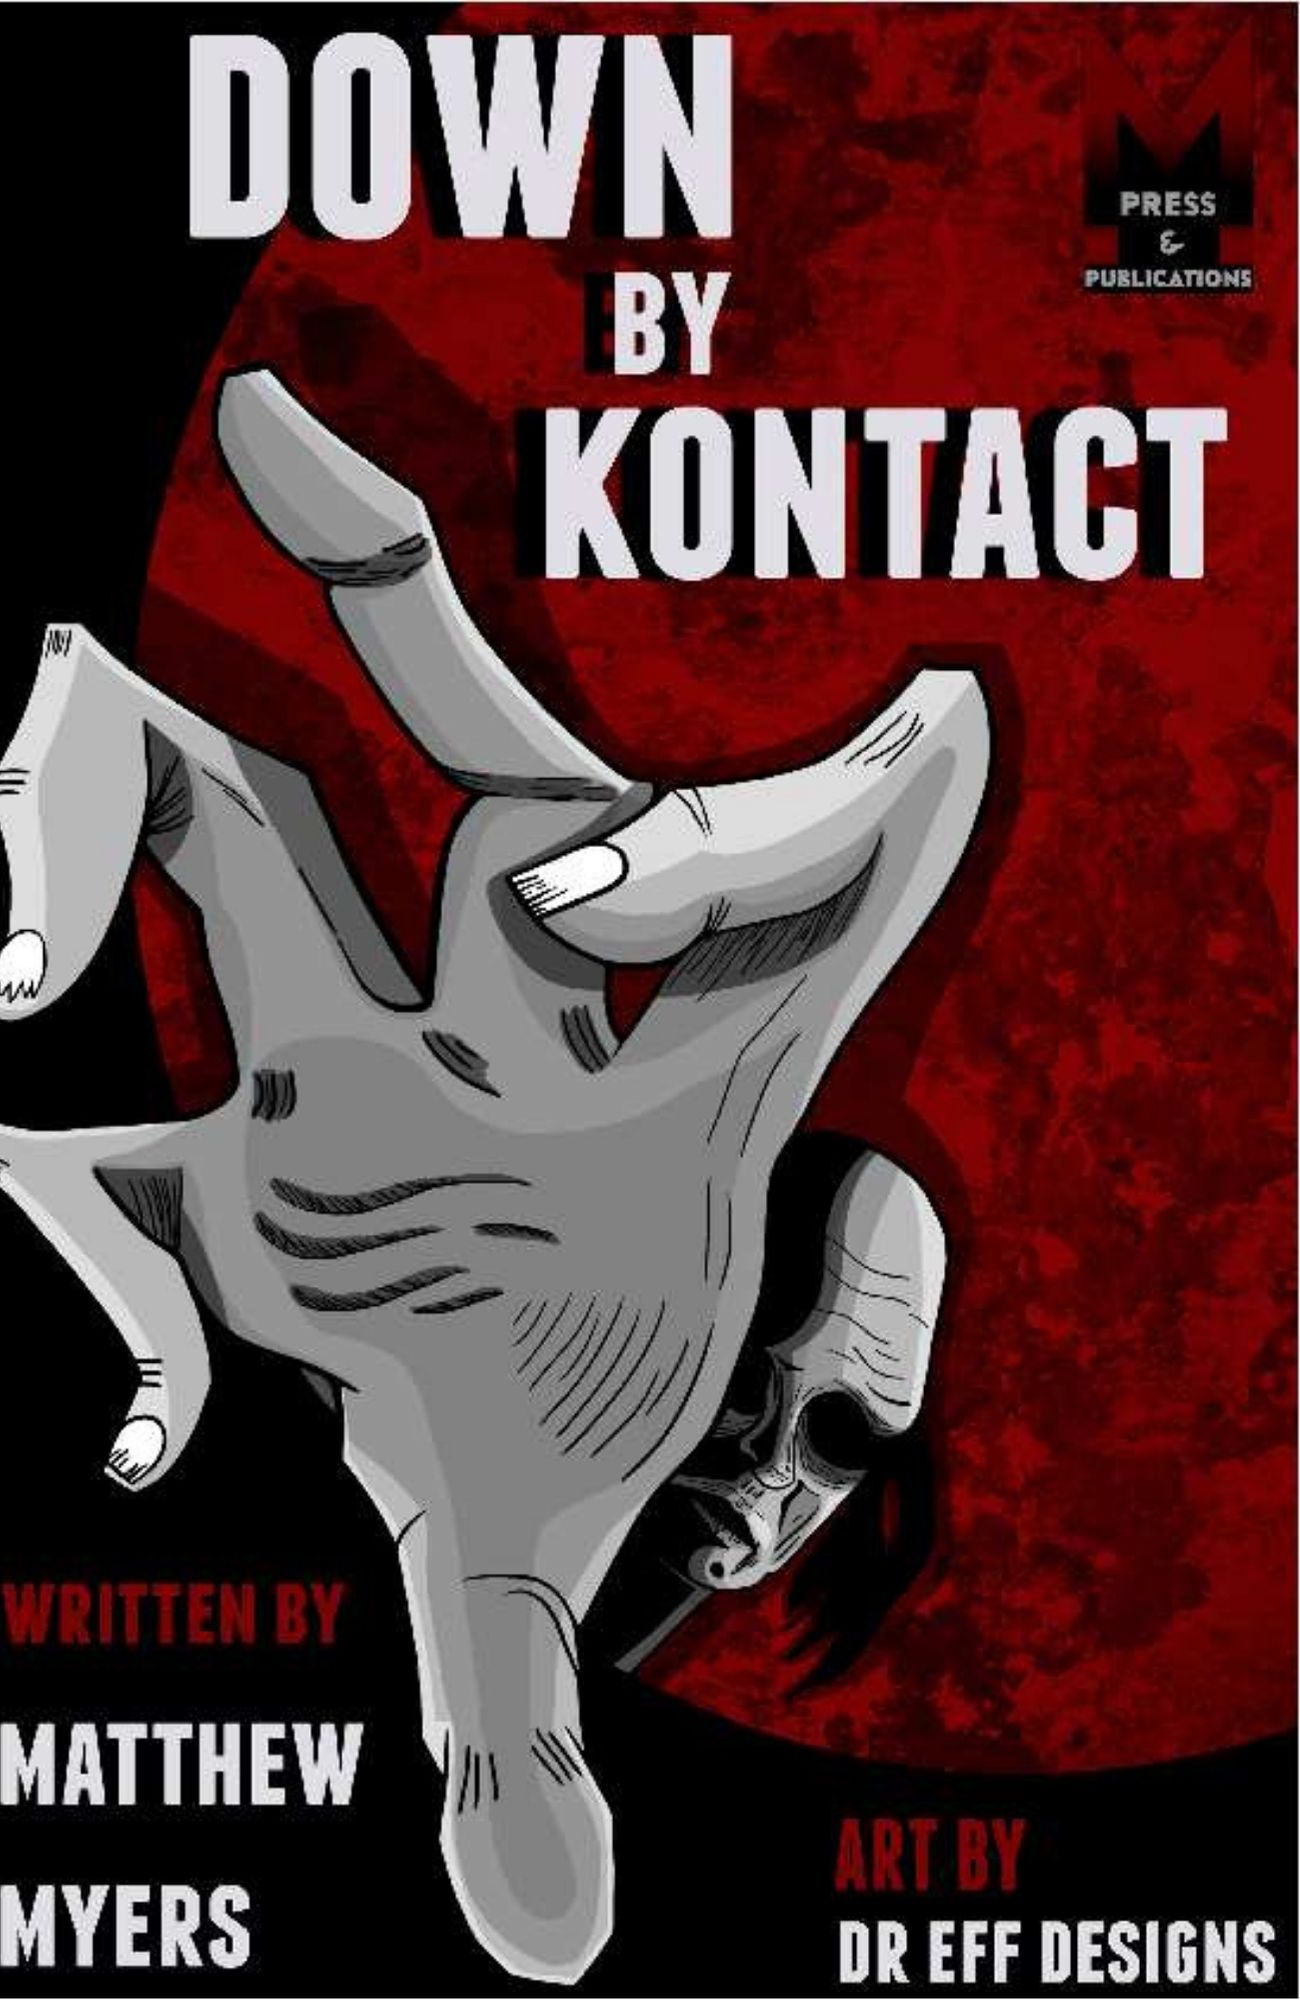 Down by Kontact